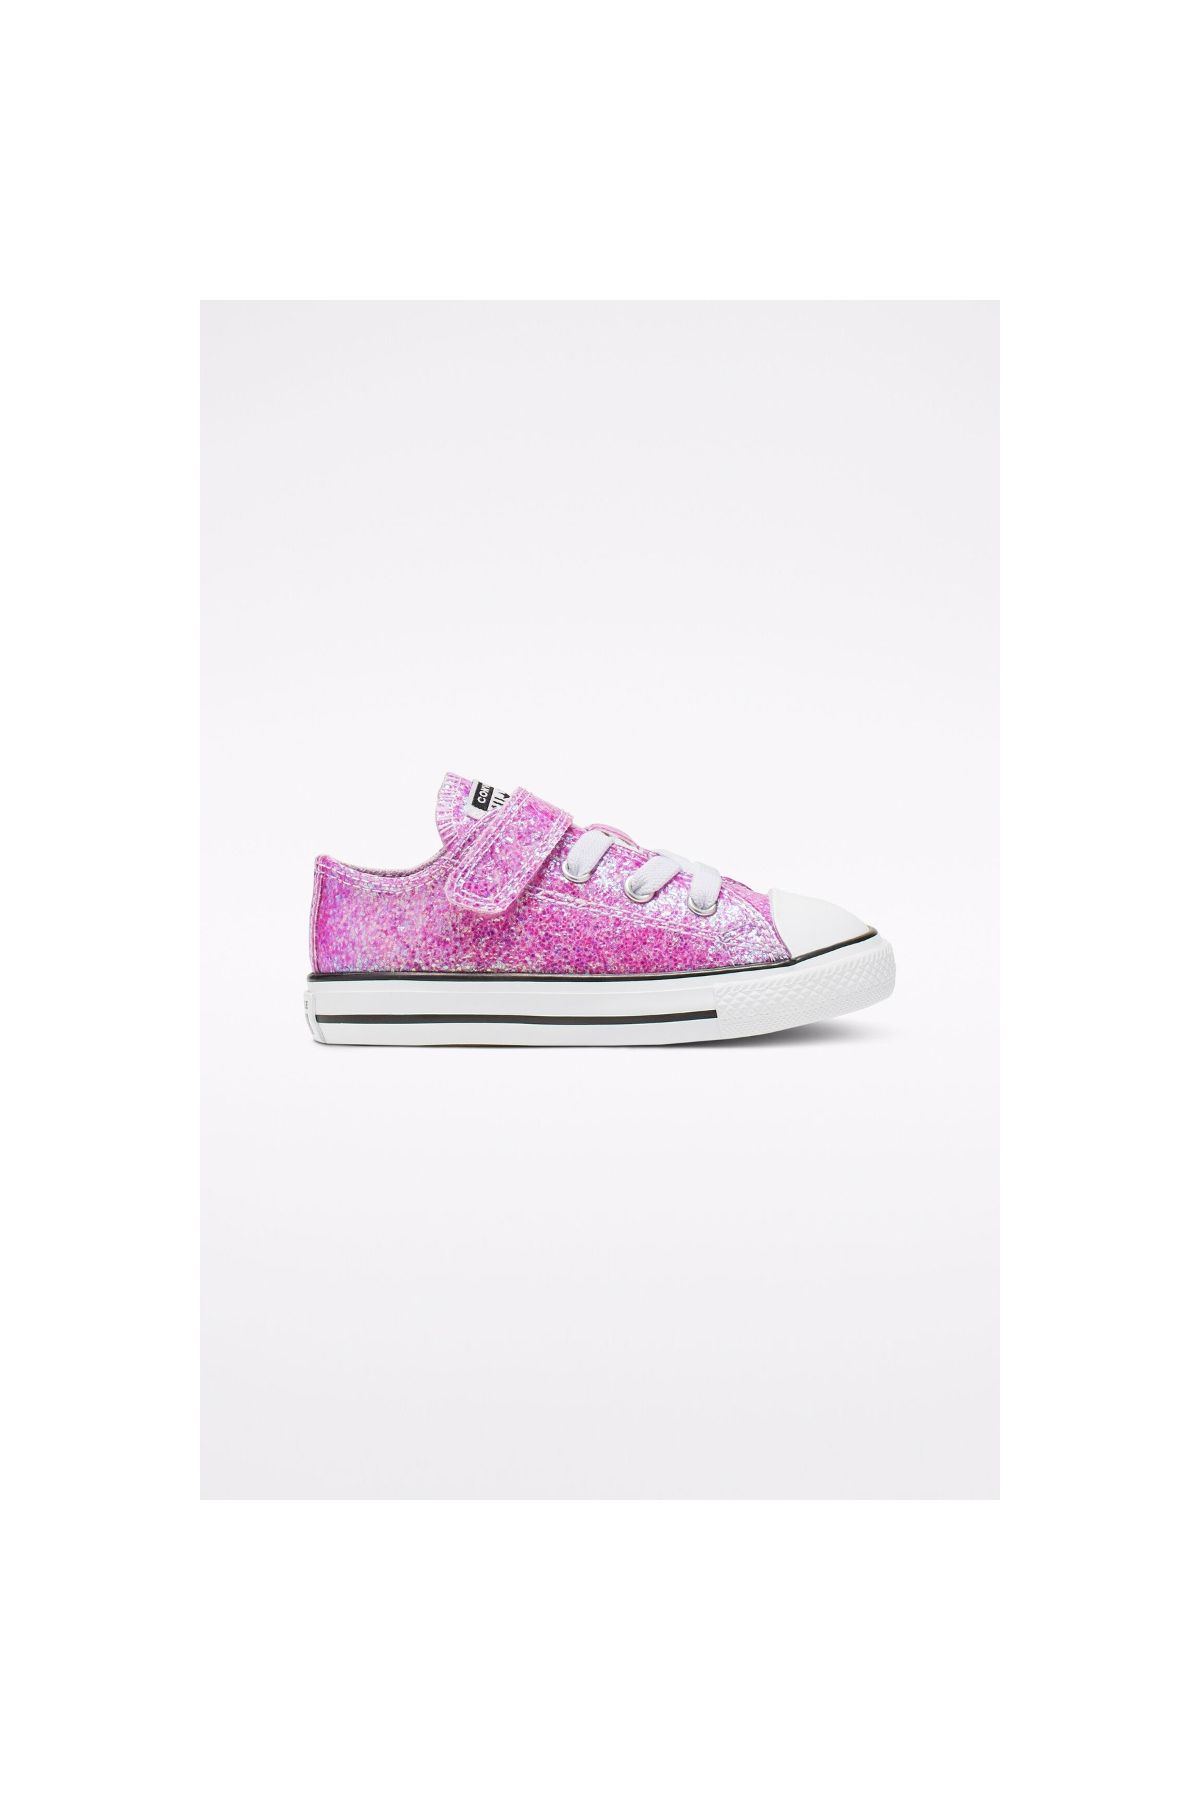 Converse Coated Glitter Hook and Loop Chuck Taylor All Star Bright Purple  Infant Sneakers